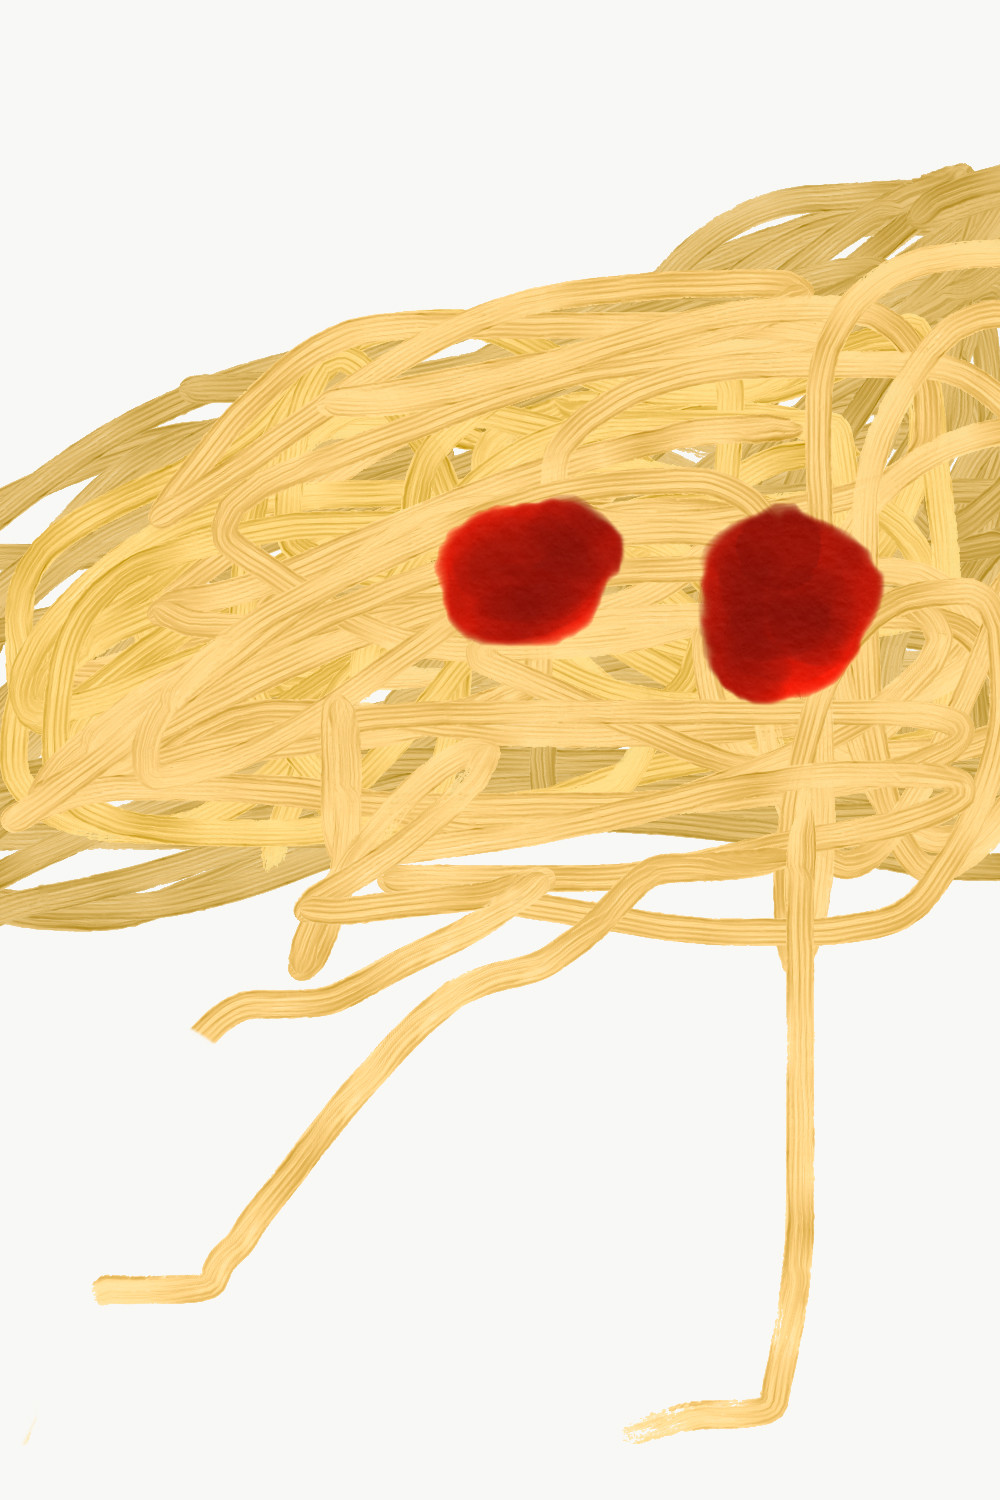 “Spaghetti with ketchup” from “Funny pictures” series, digital painting, 2020